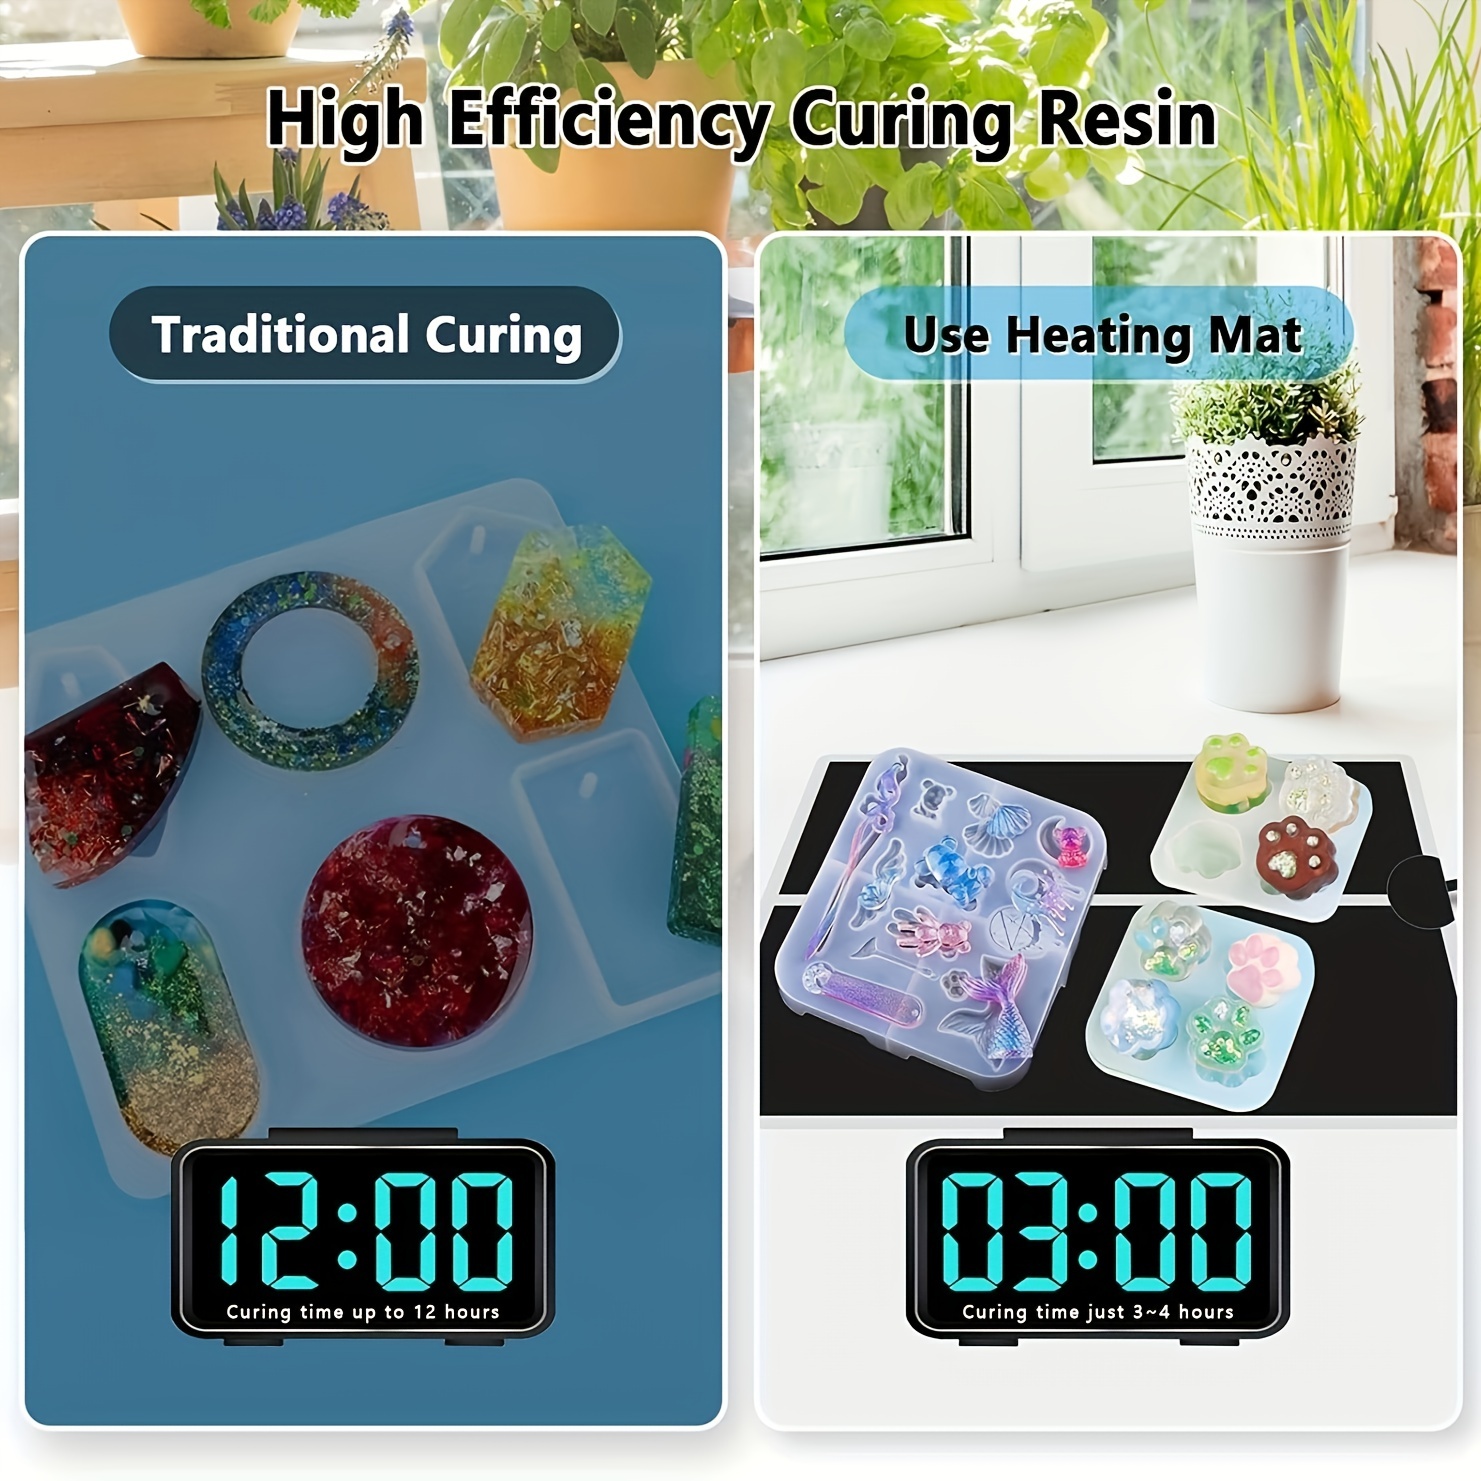 Resin Heating Mat, Resin Curing Machine with Silicone Mat, Lightweight  Quick Resin Dryer Mat,Easy to Use,Resin Supplies for Epoxy Resin,Resin  Molds